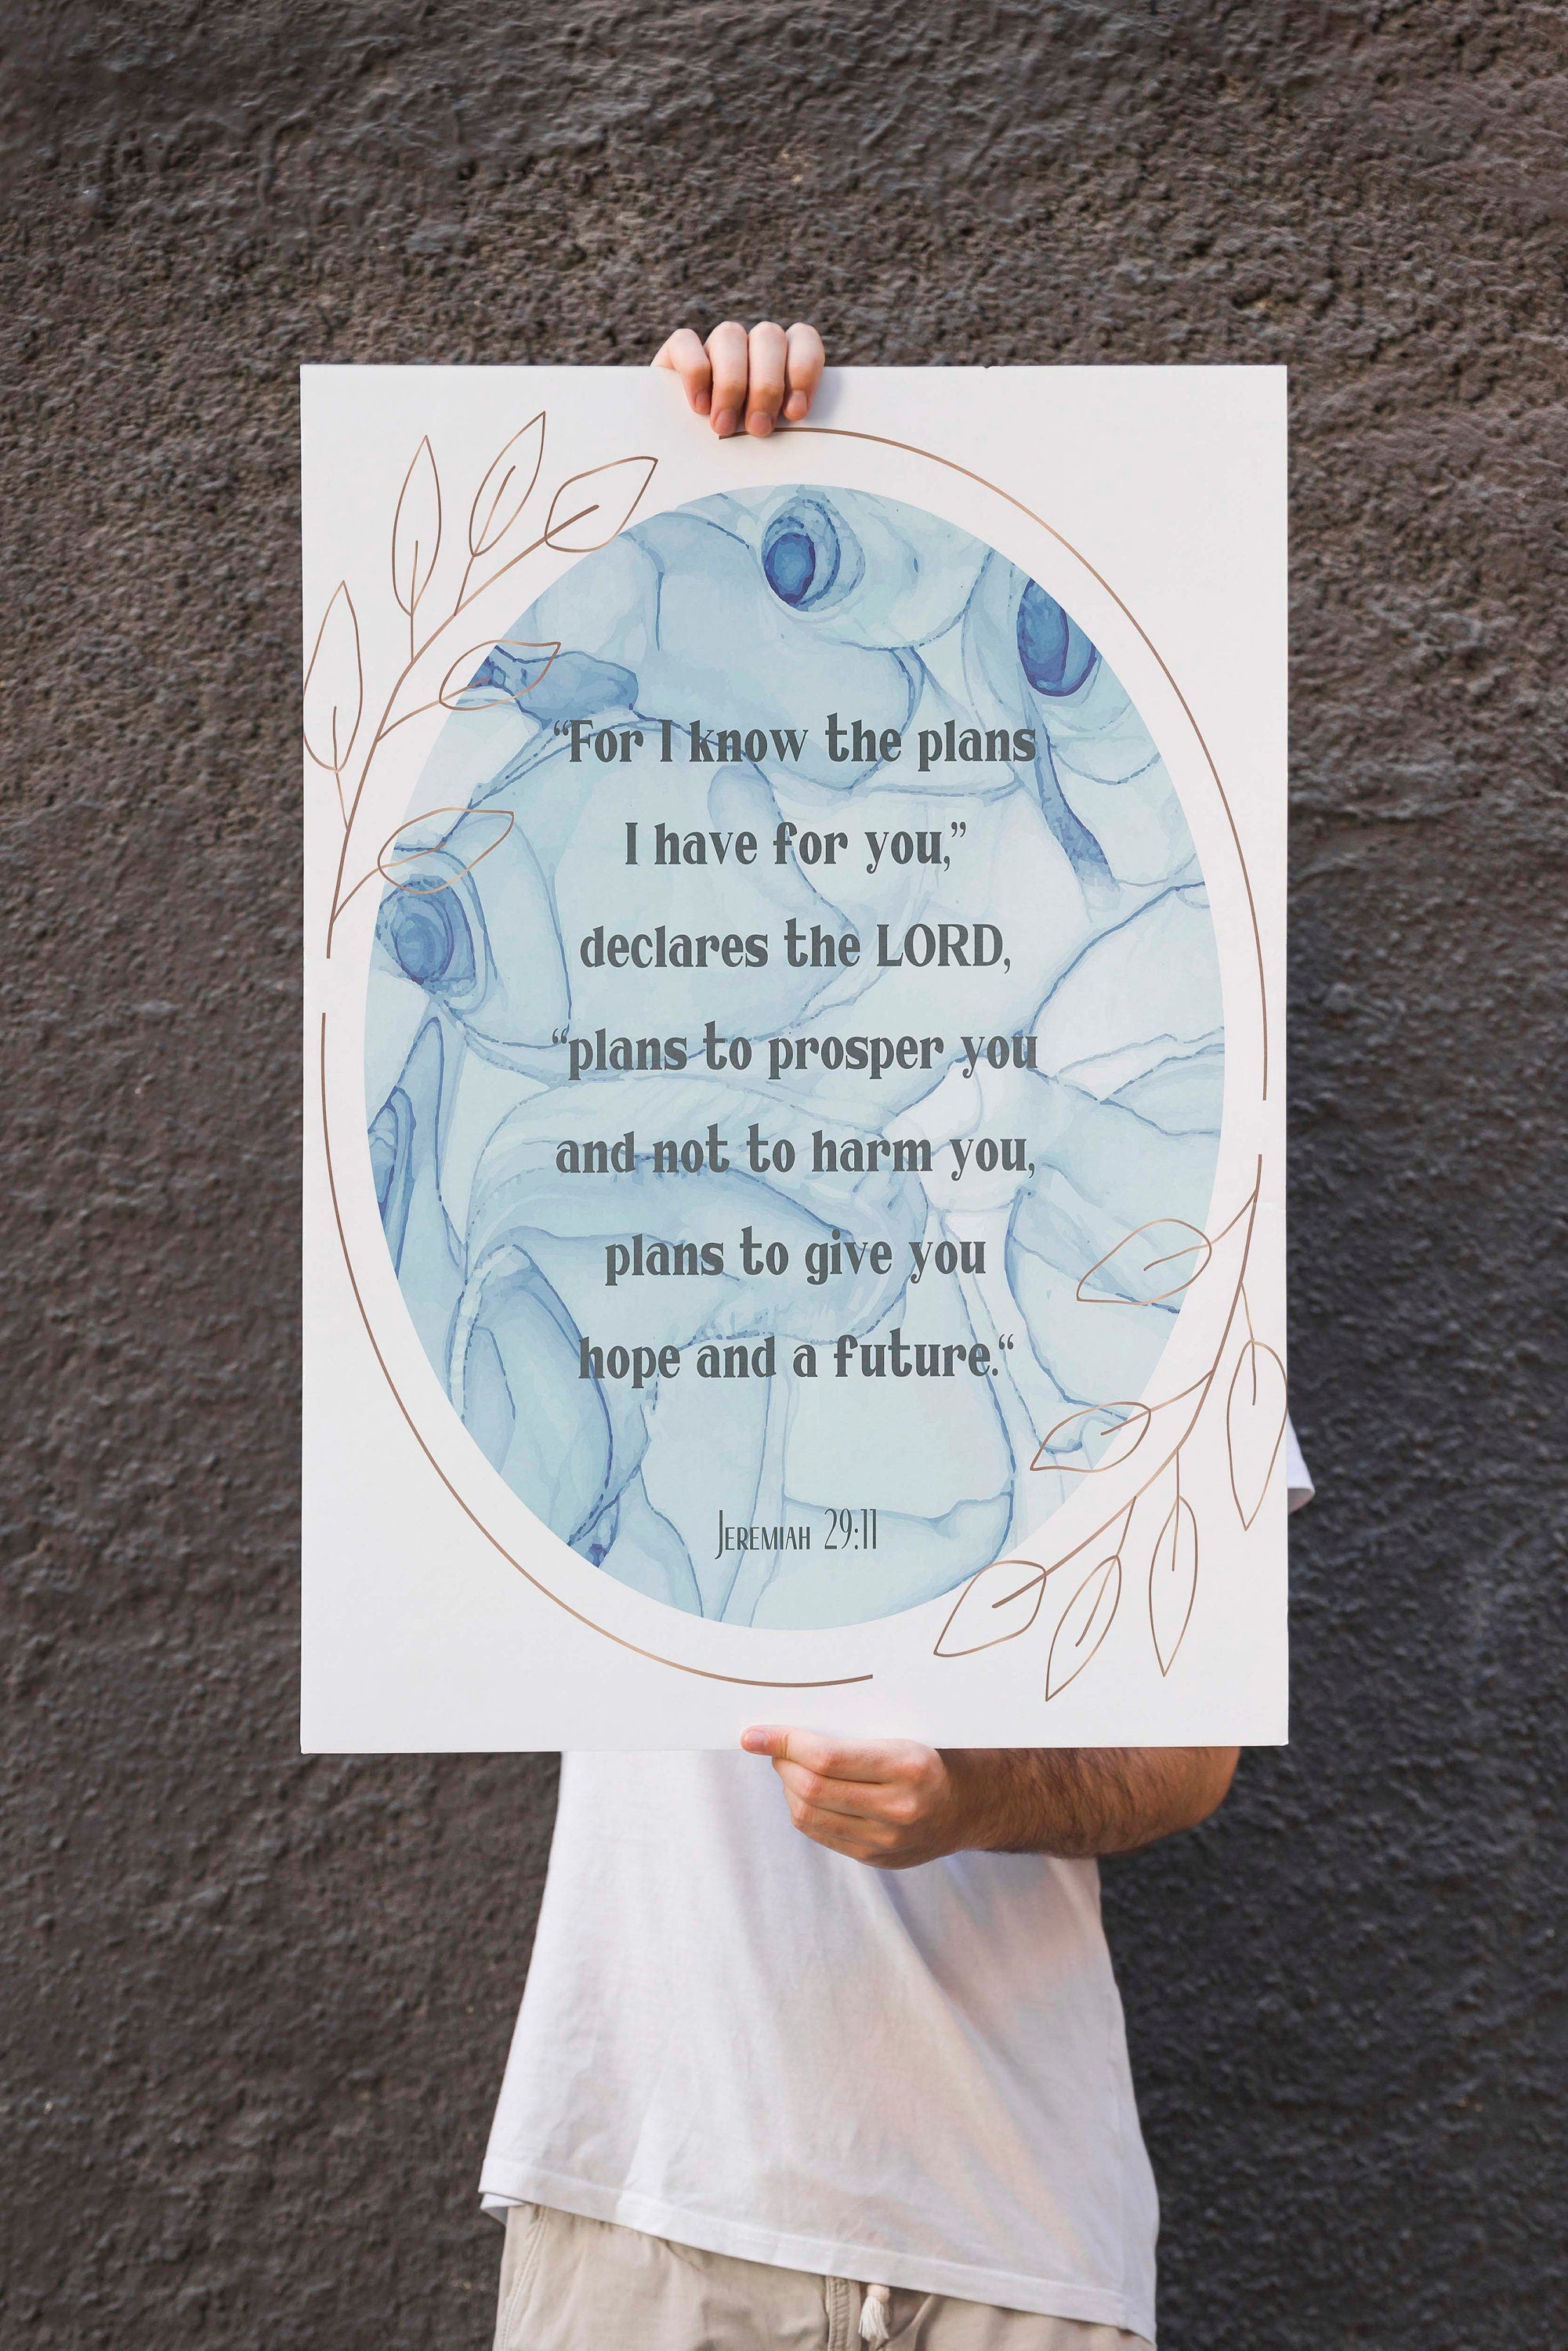 Give you Hope and a Future Jeremiah 29:11 Bible Verse Print, Inspirational Gift Wall Art